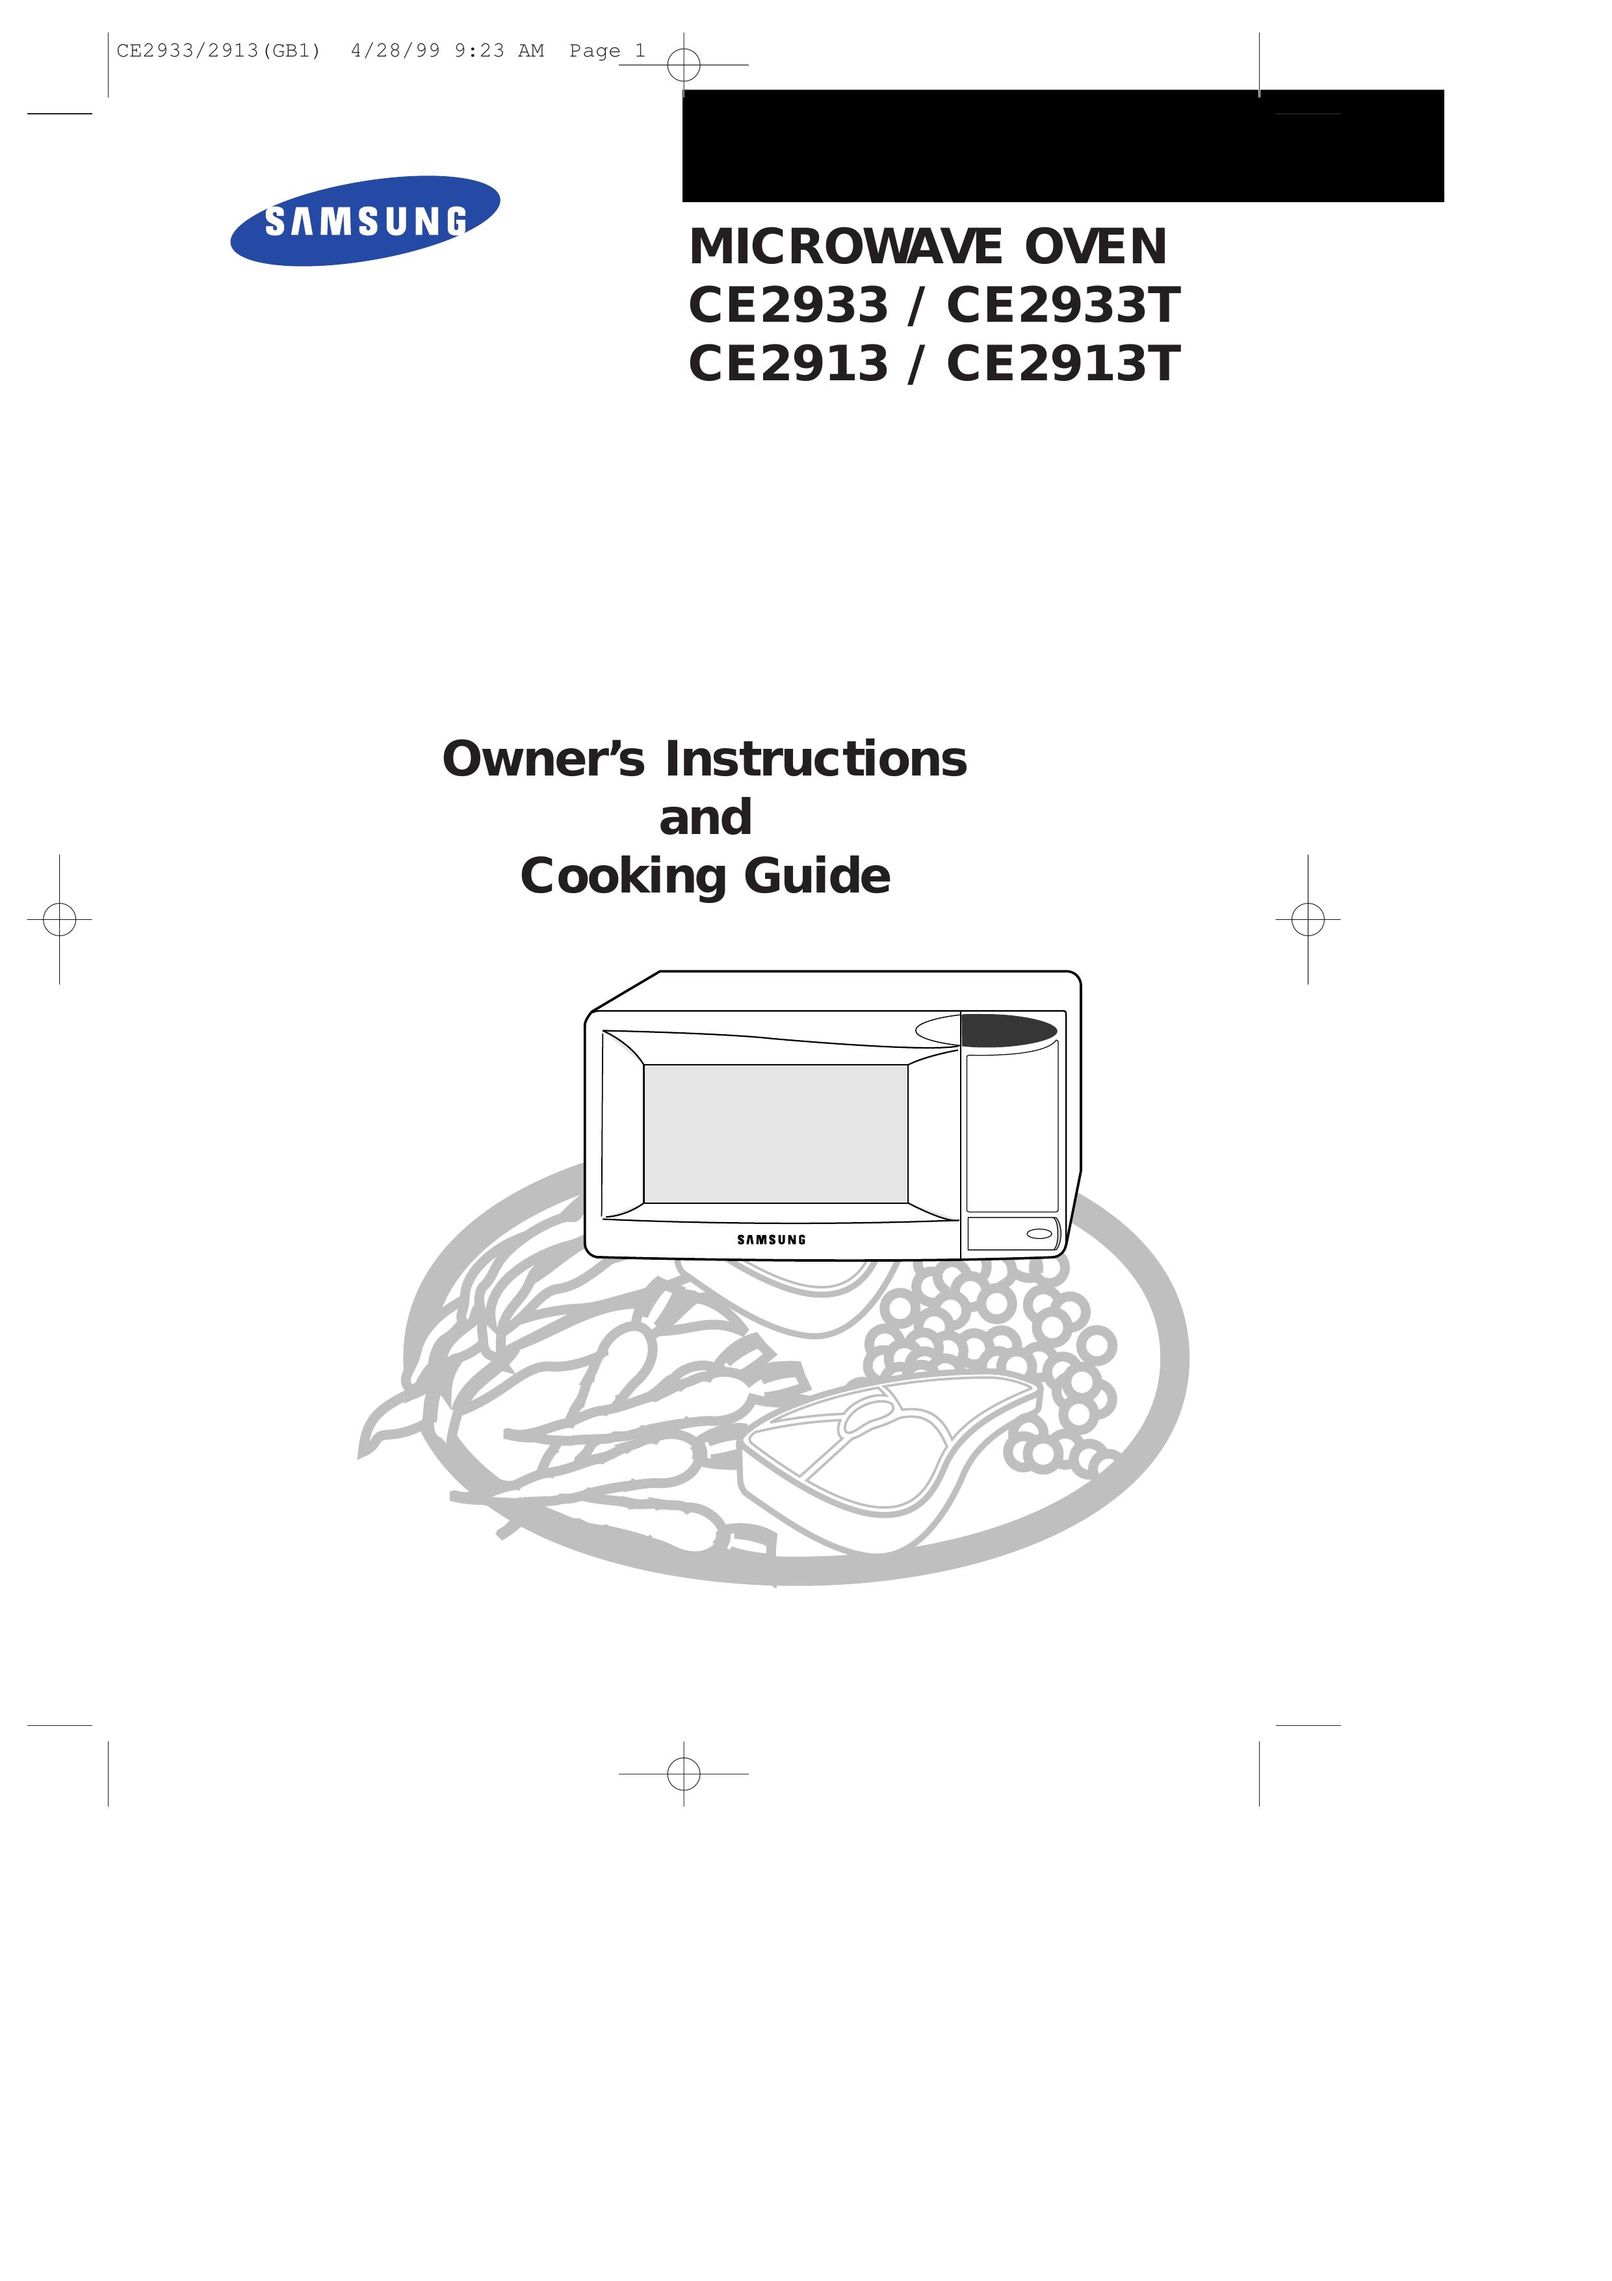 Samsung CE2913T Microwave Oven User Manual